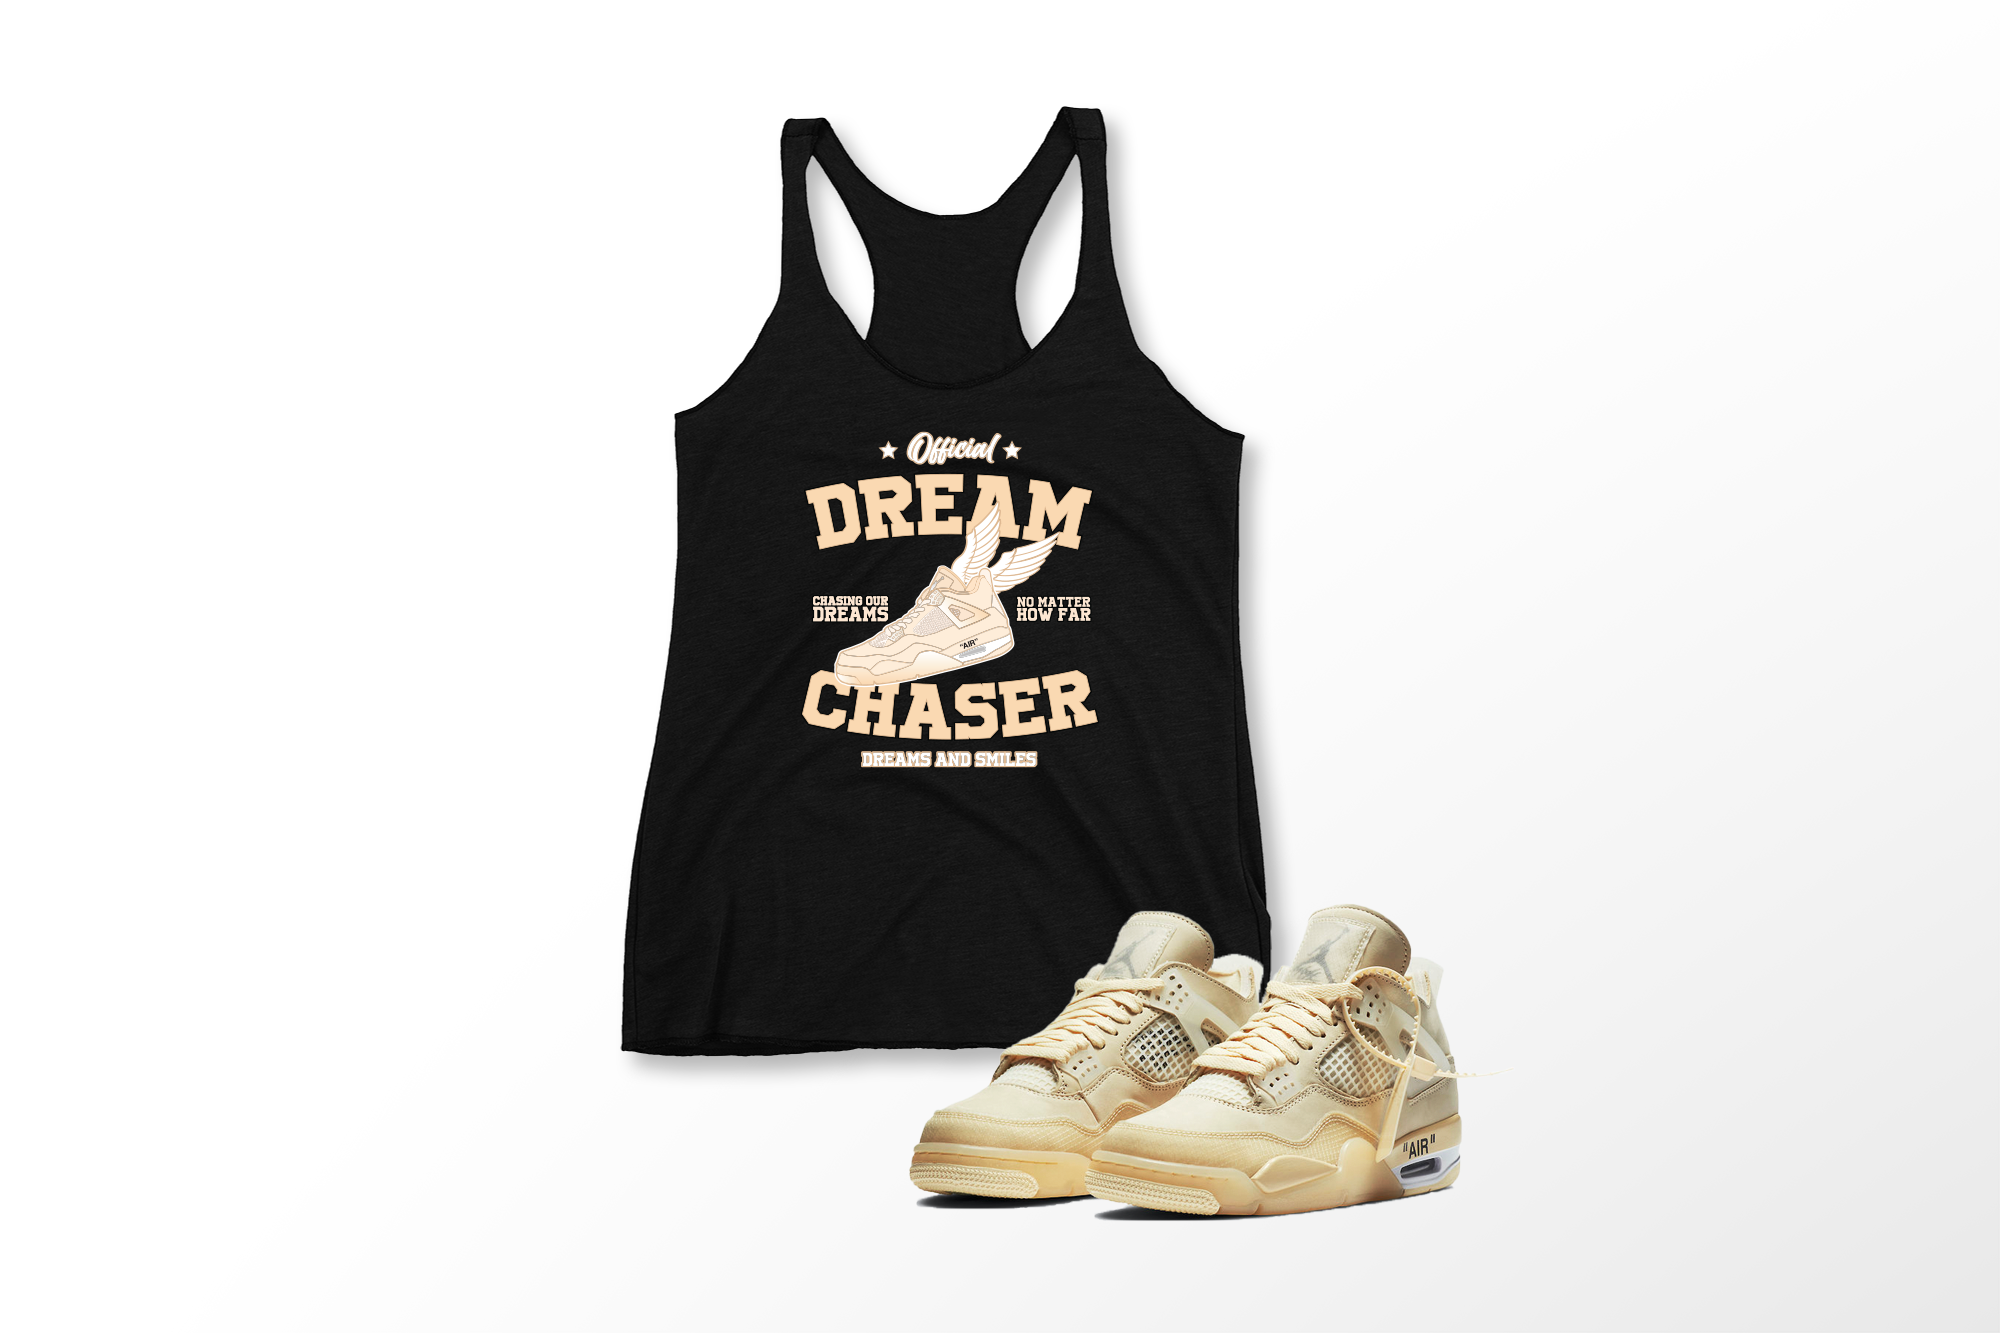 'Official Dream Chaser' in Sail CW Women's Racerback Tank